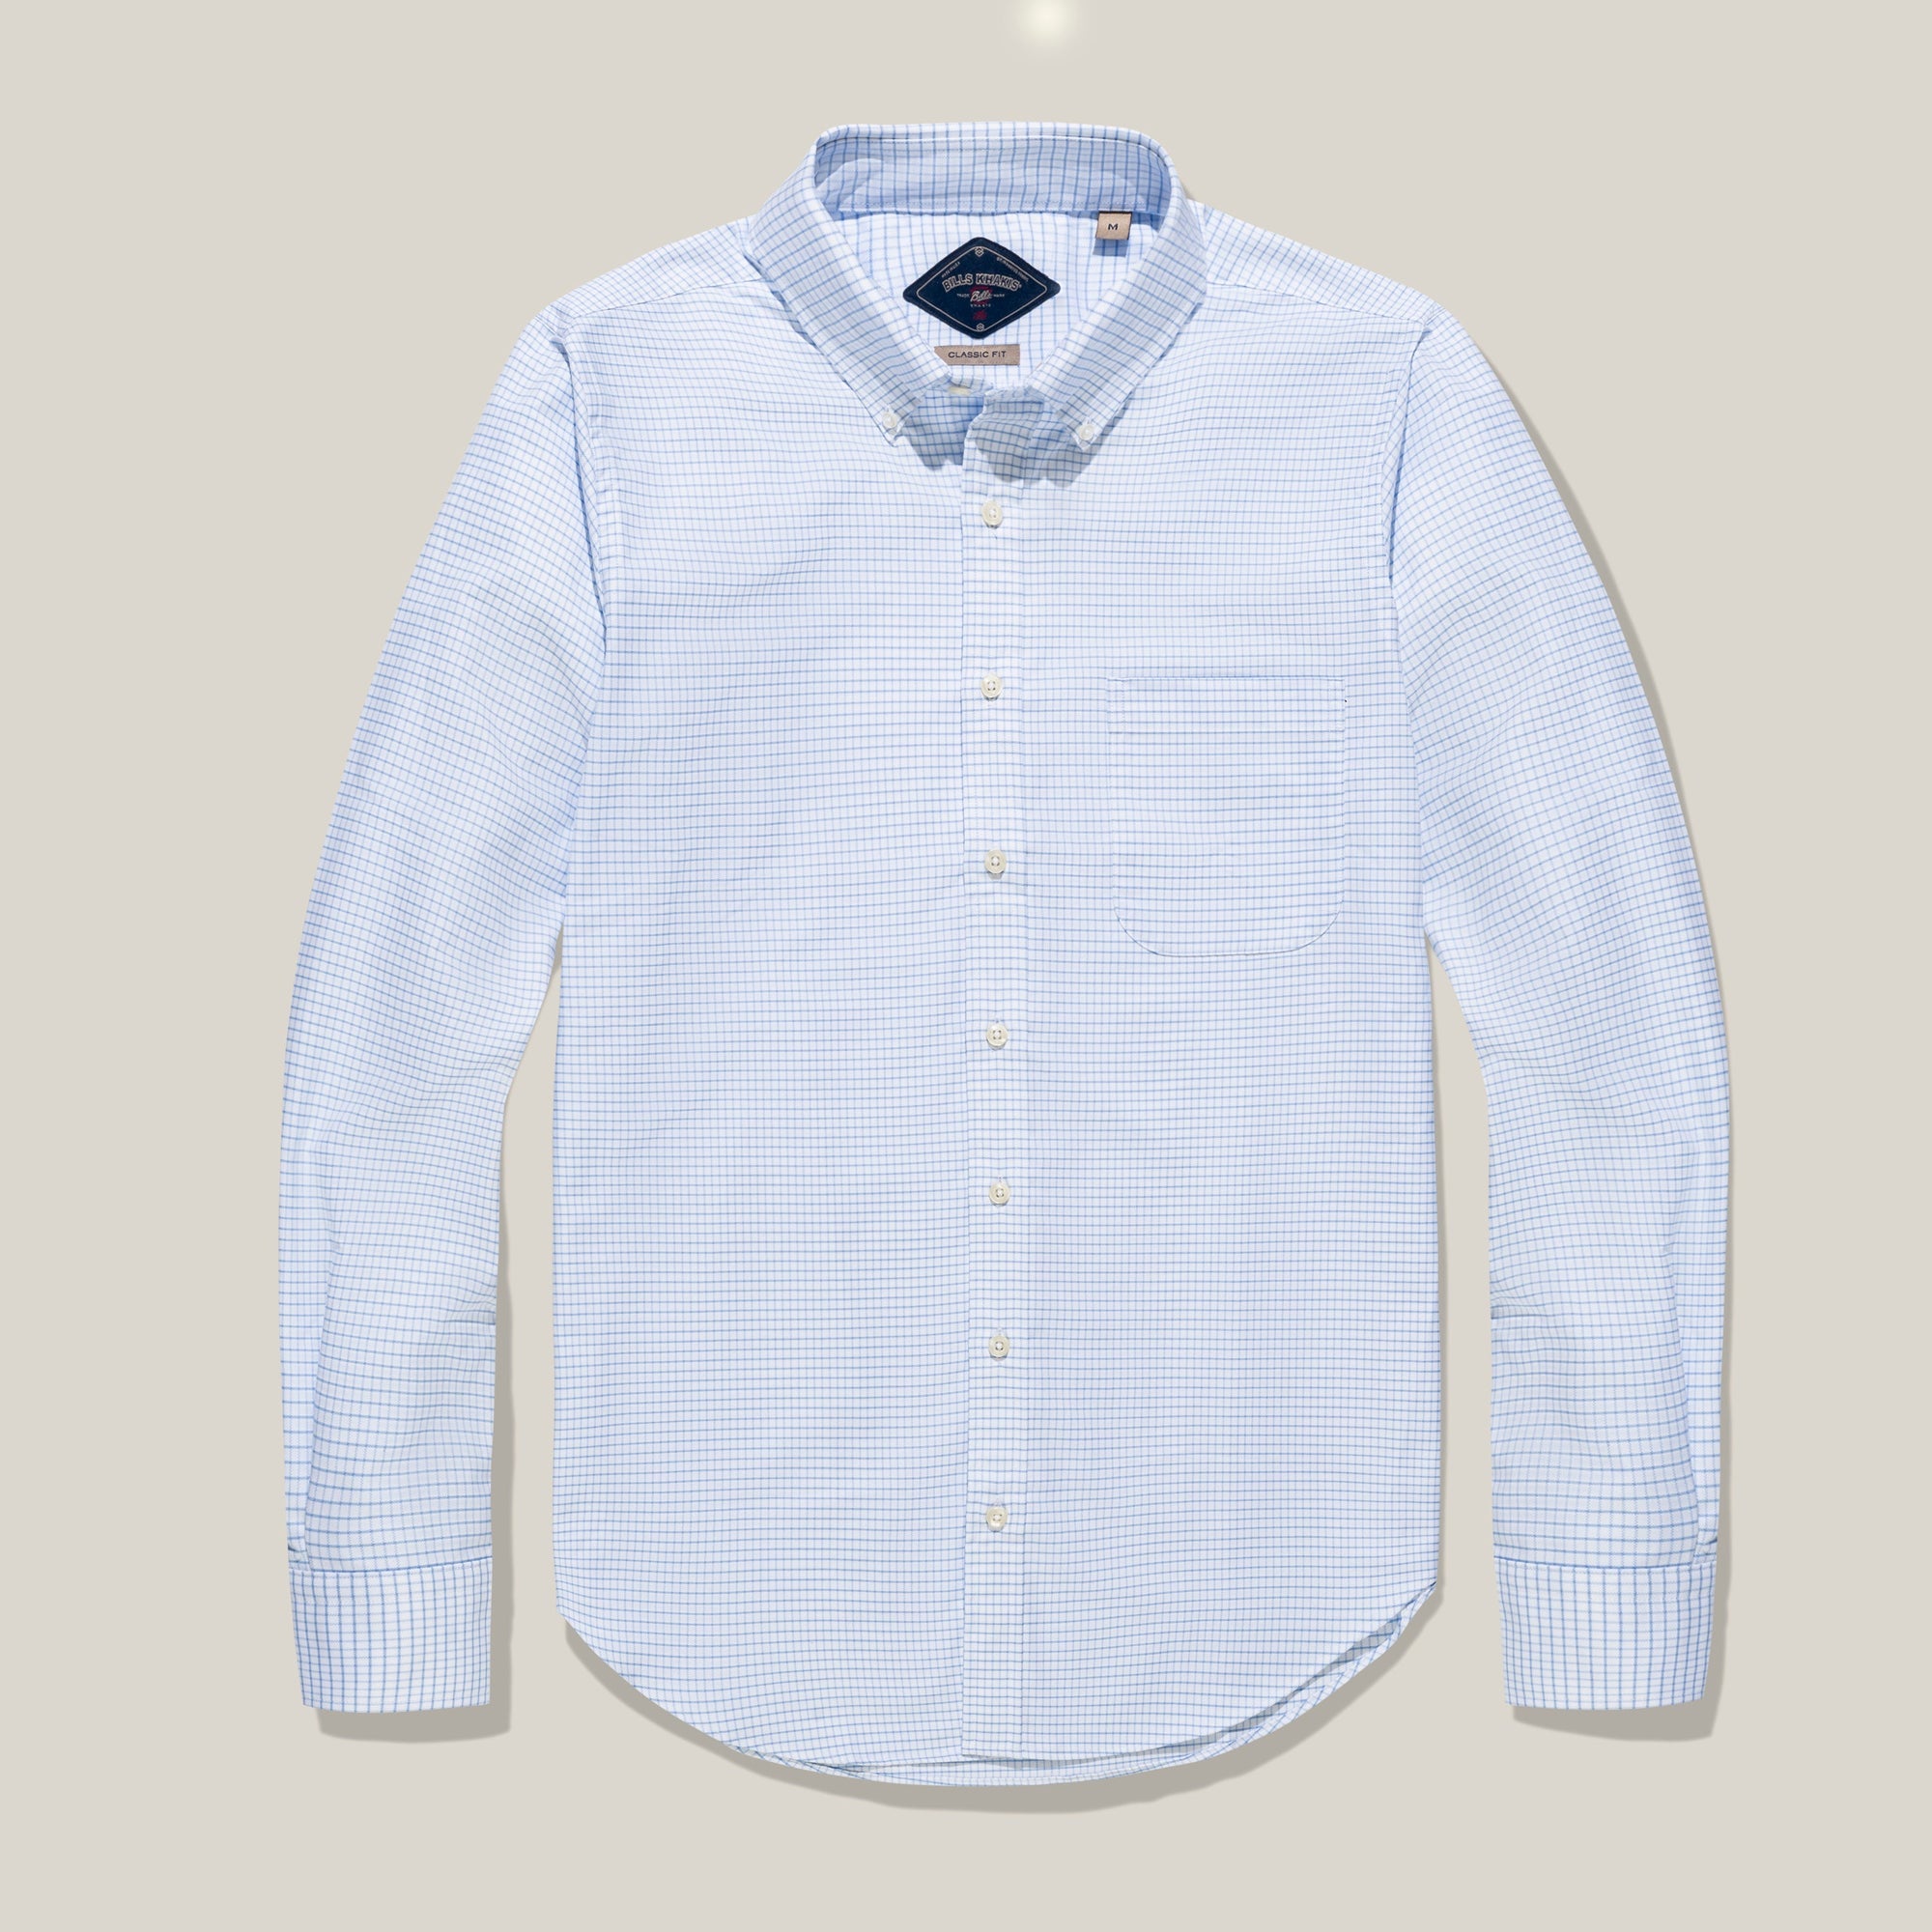 Classic Fit Grid Check Oxford Sport Shirt in Light Blue by Bills Khakis